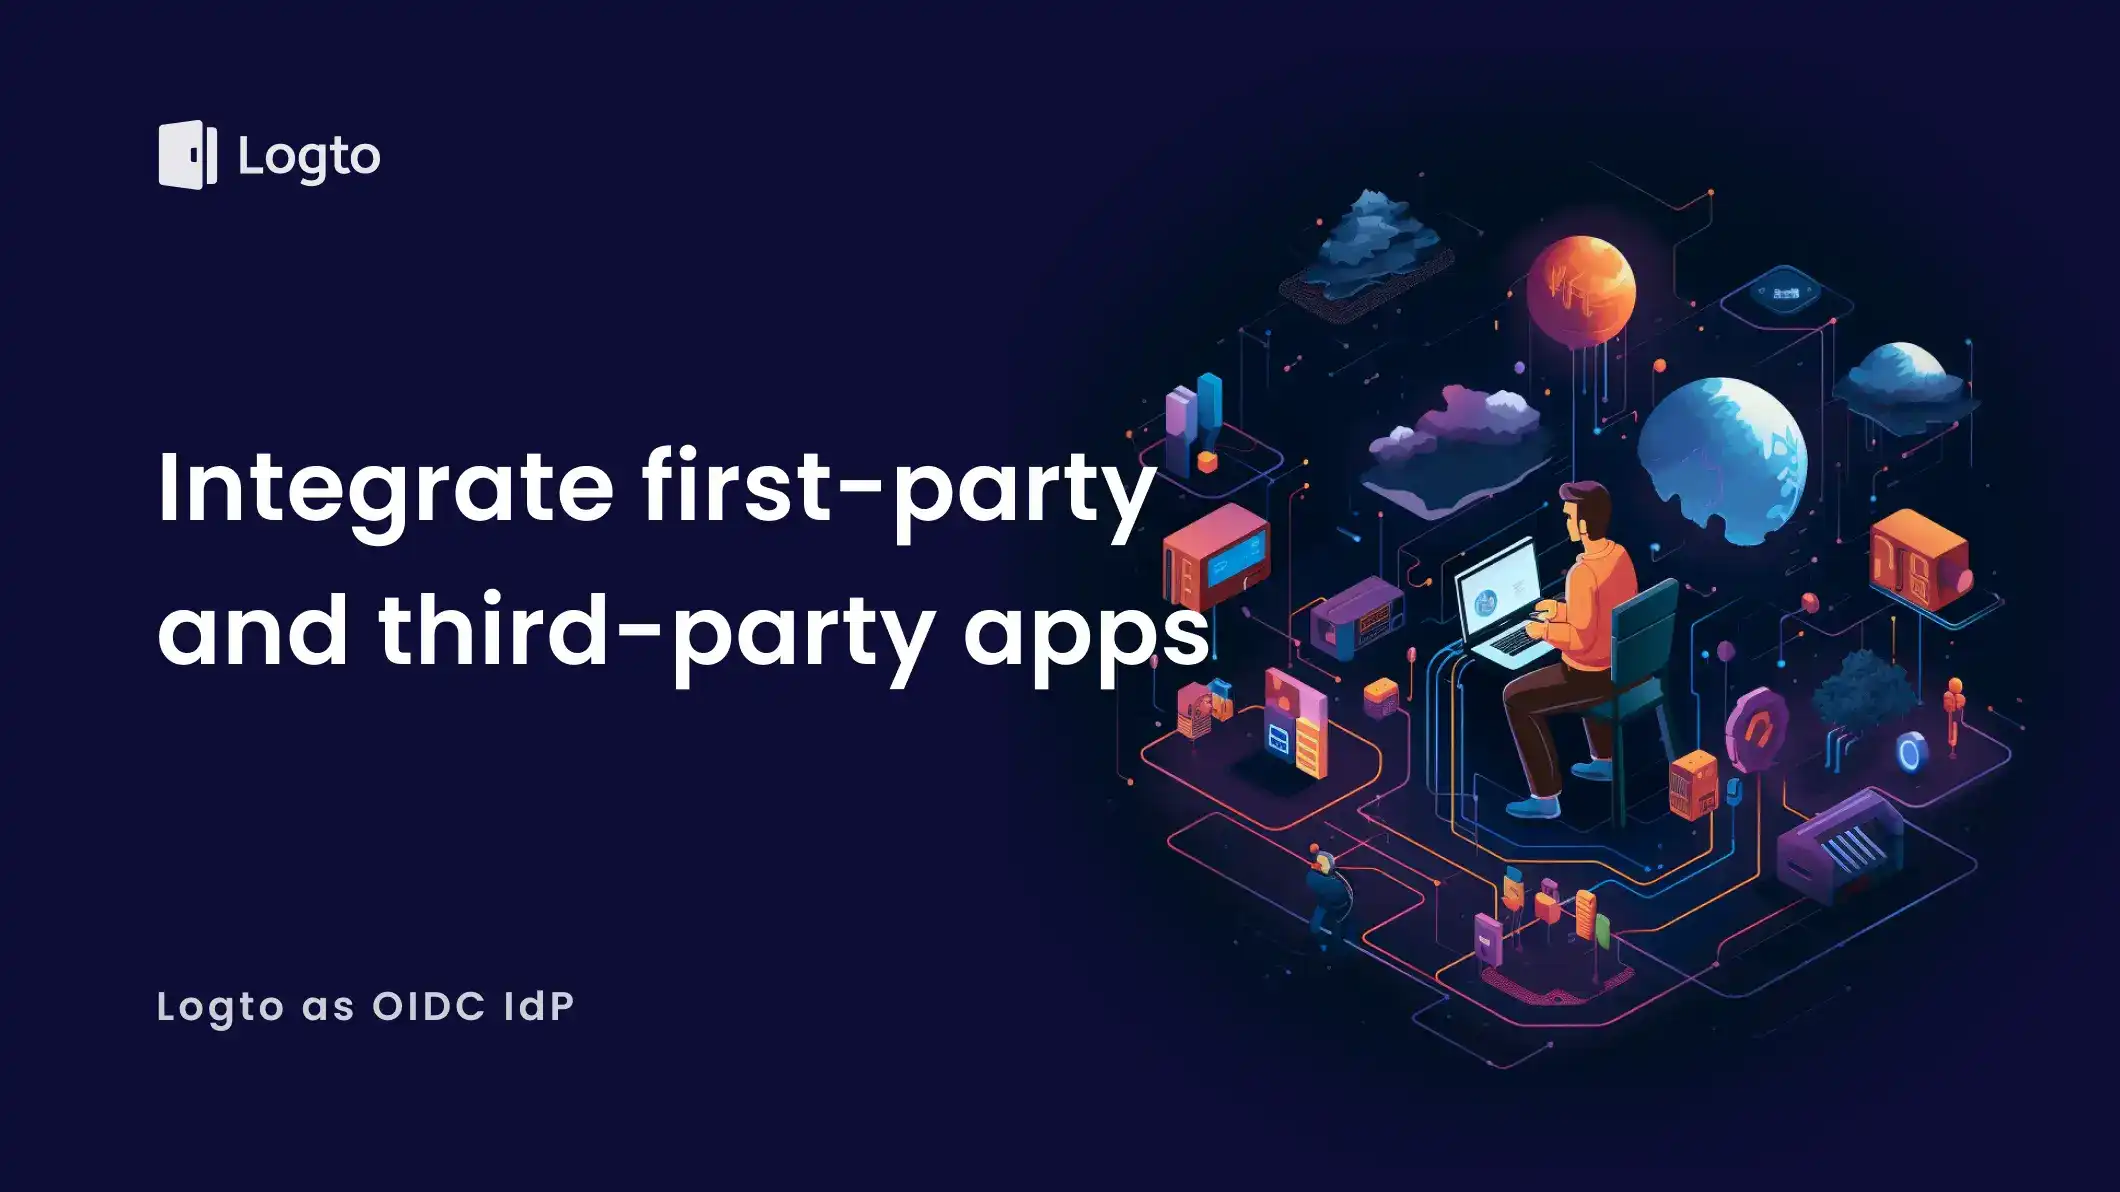 Integrate identity system: First-party and third-party apps with Logto